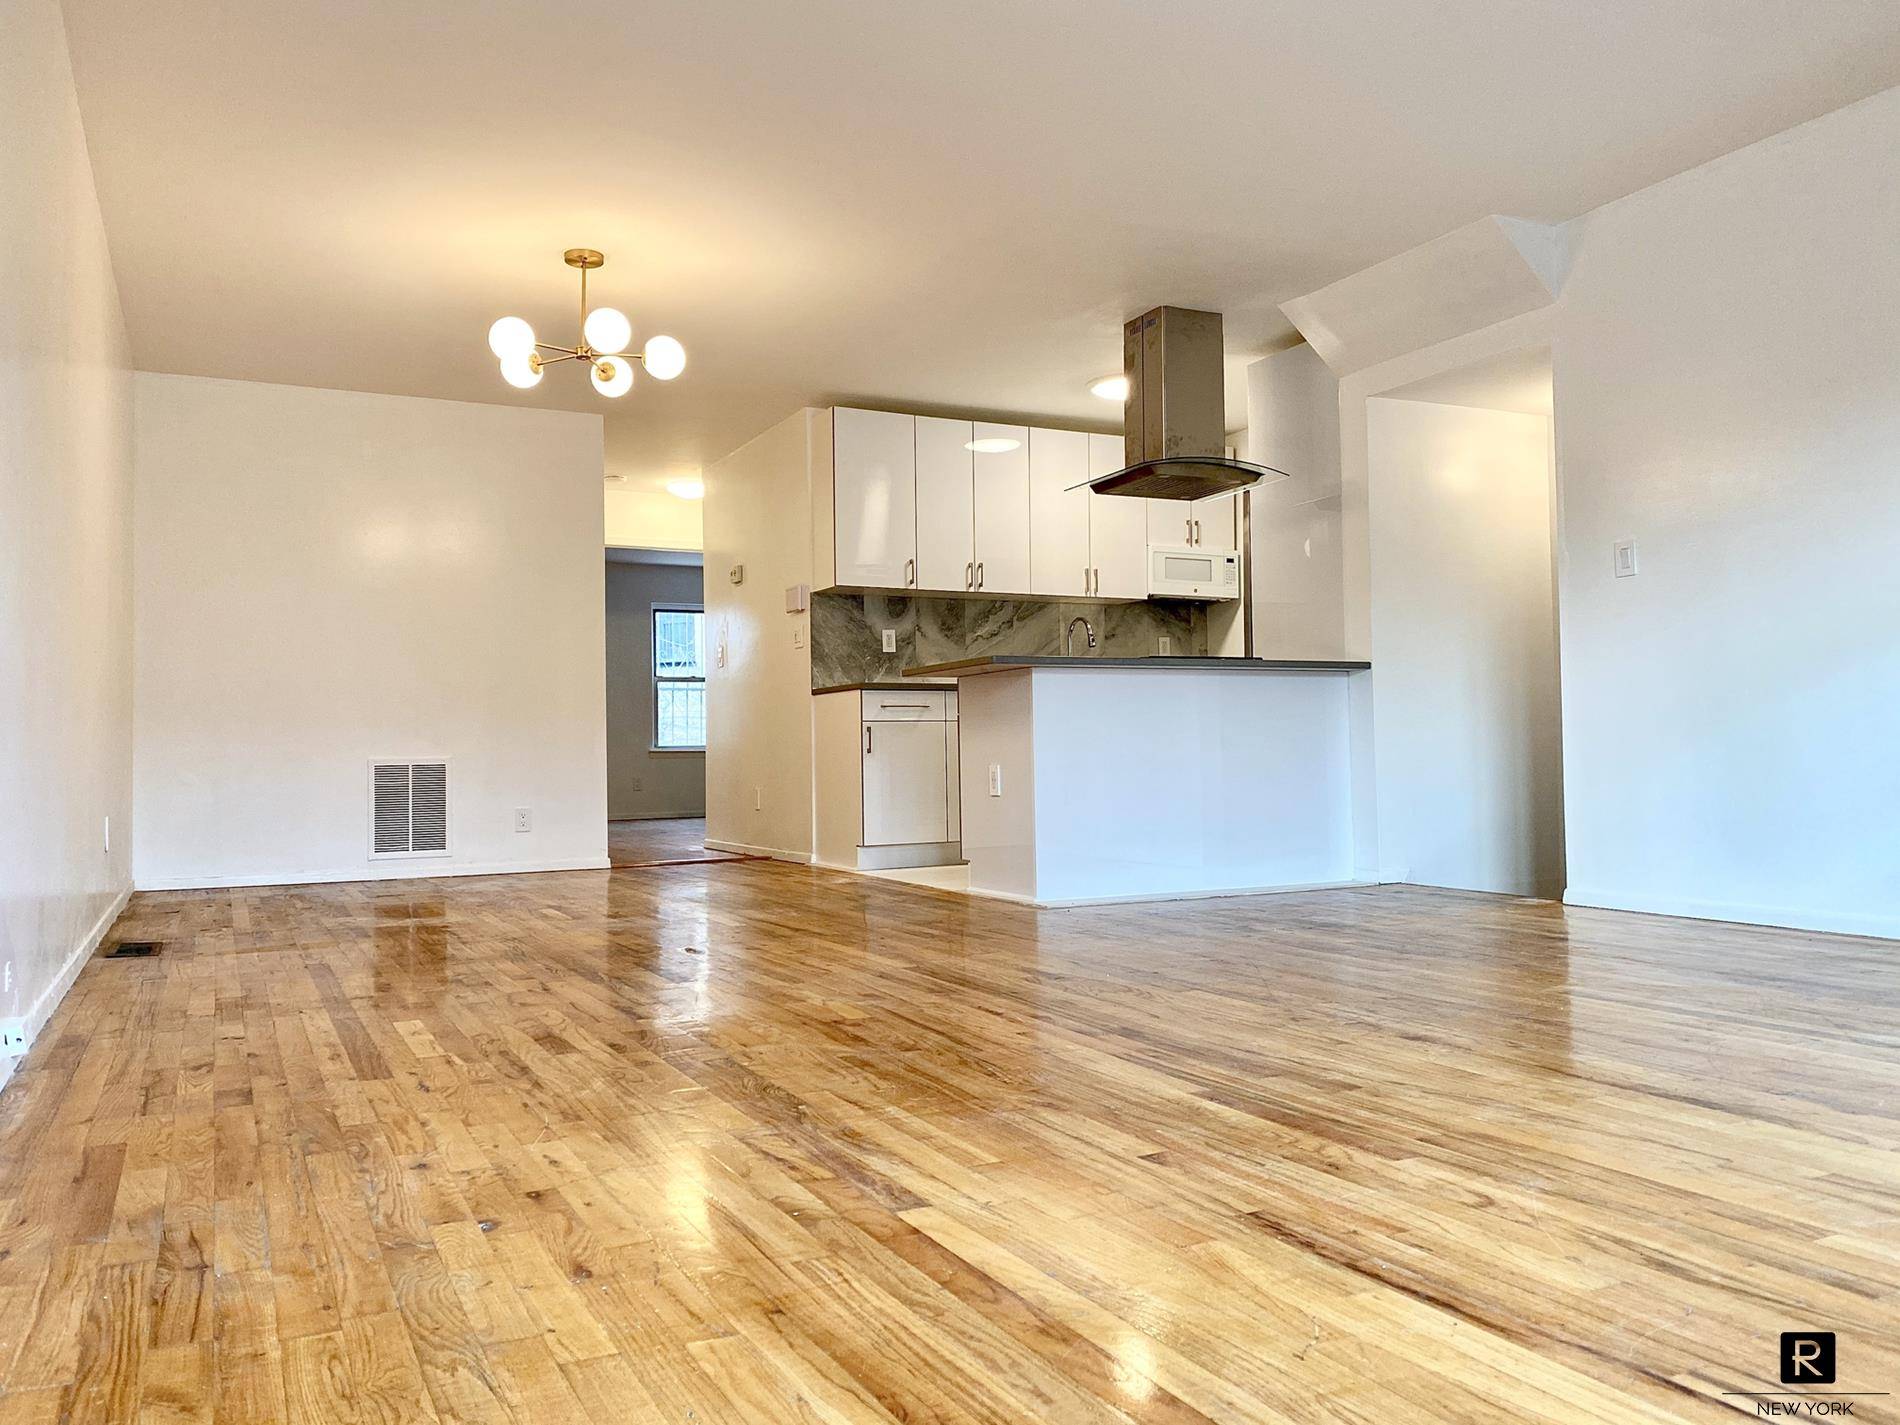 Massive DUPLEX apartment with a PRIVATE GARDEN 20 minutes commute from Manhattan.